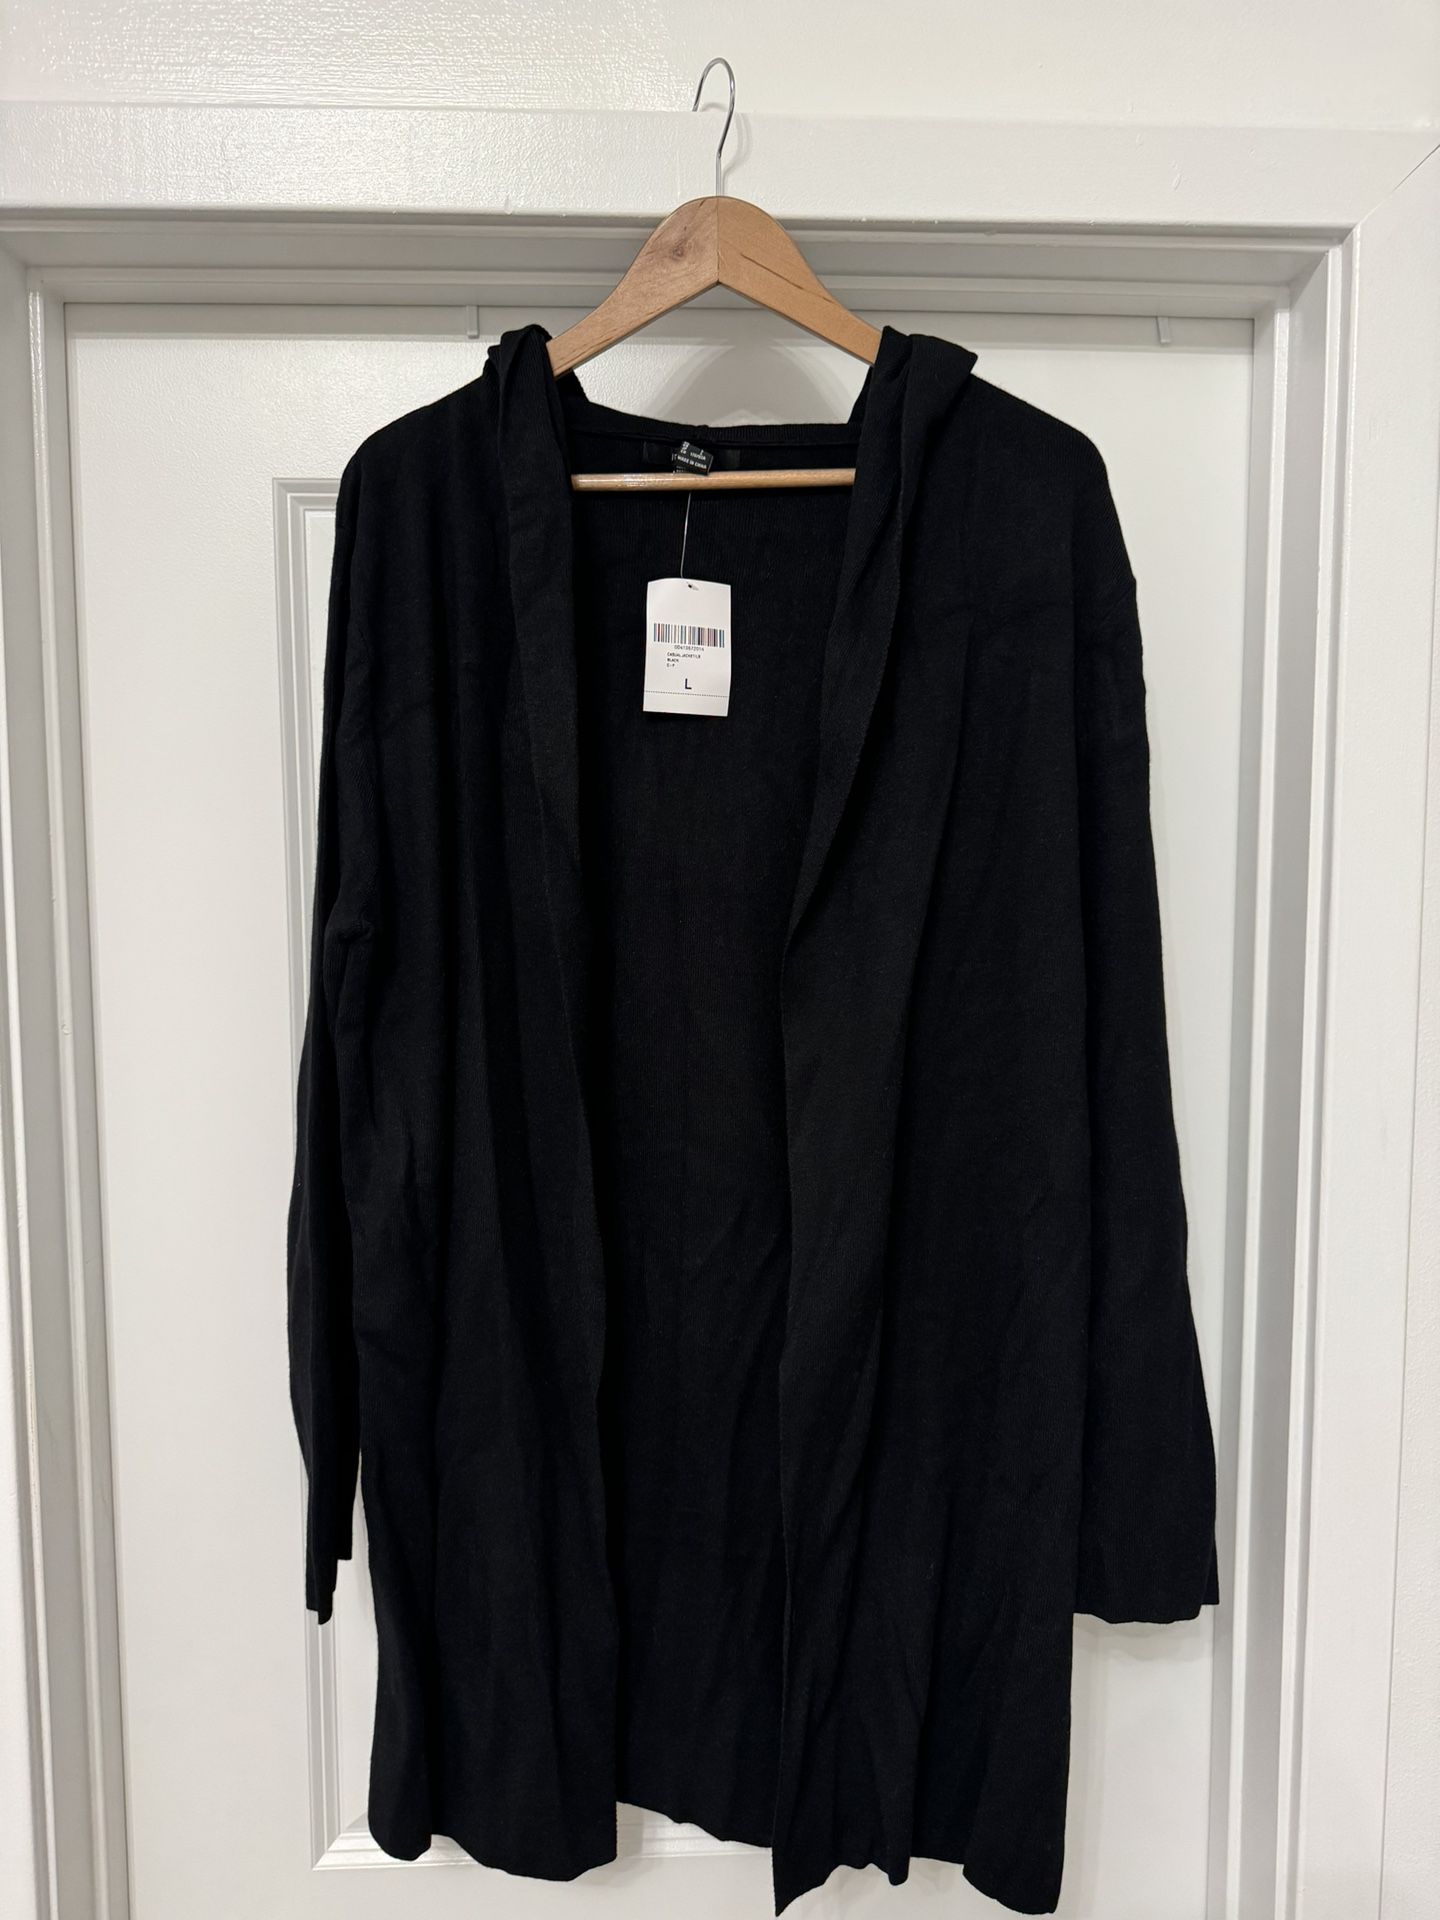 Forever 21 Cardigan ( Size L)